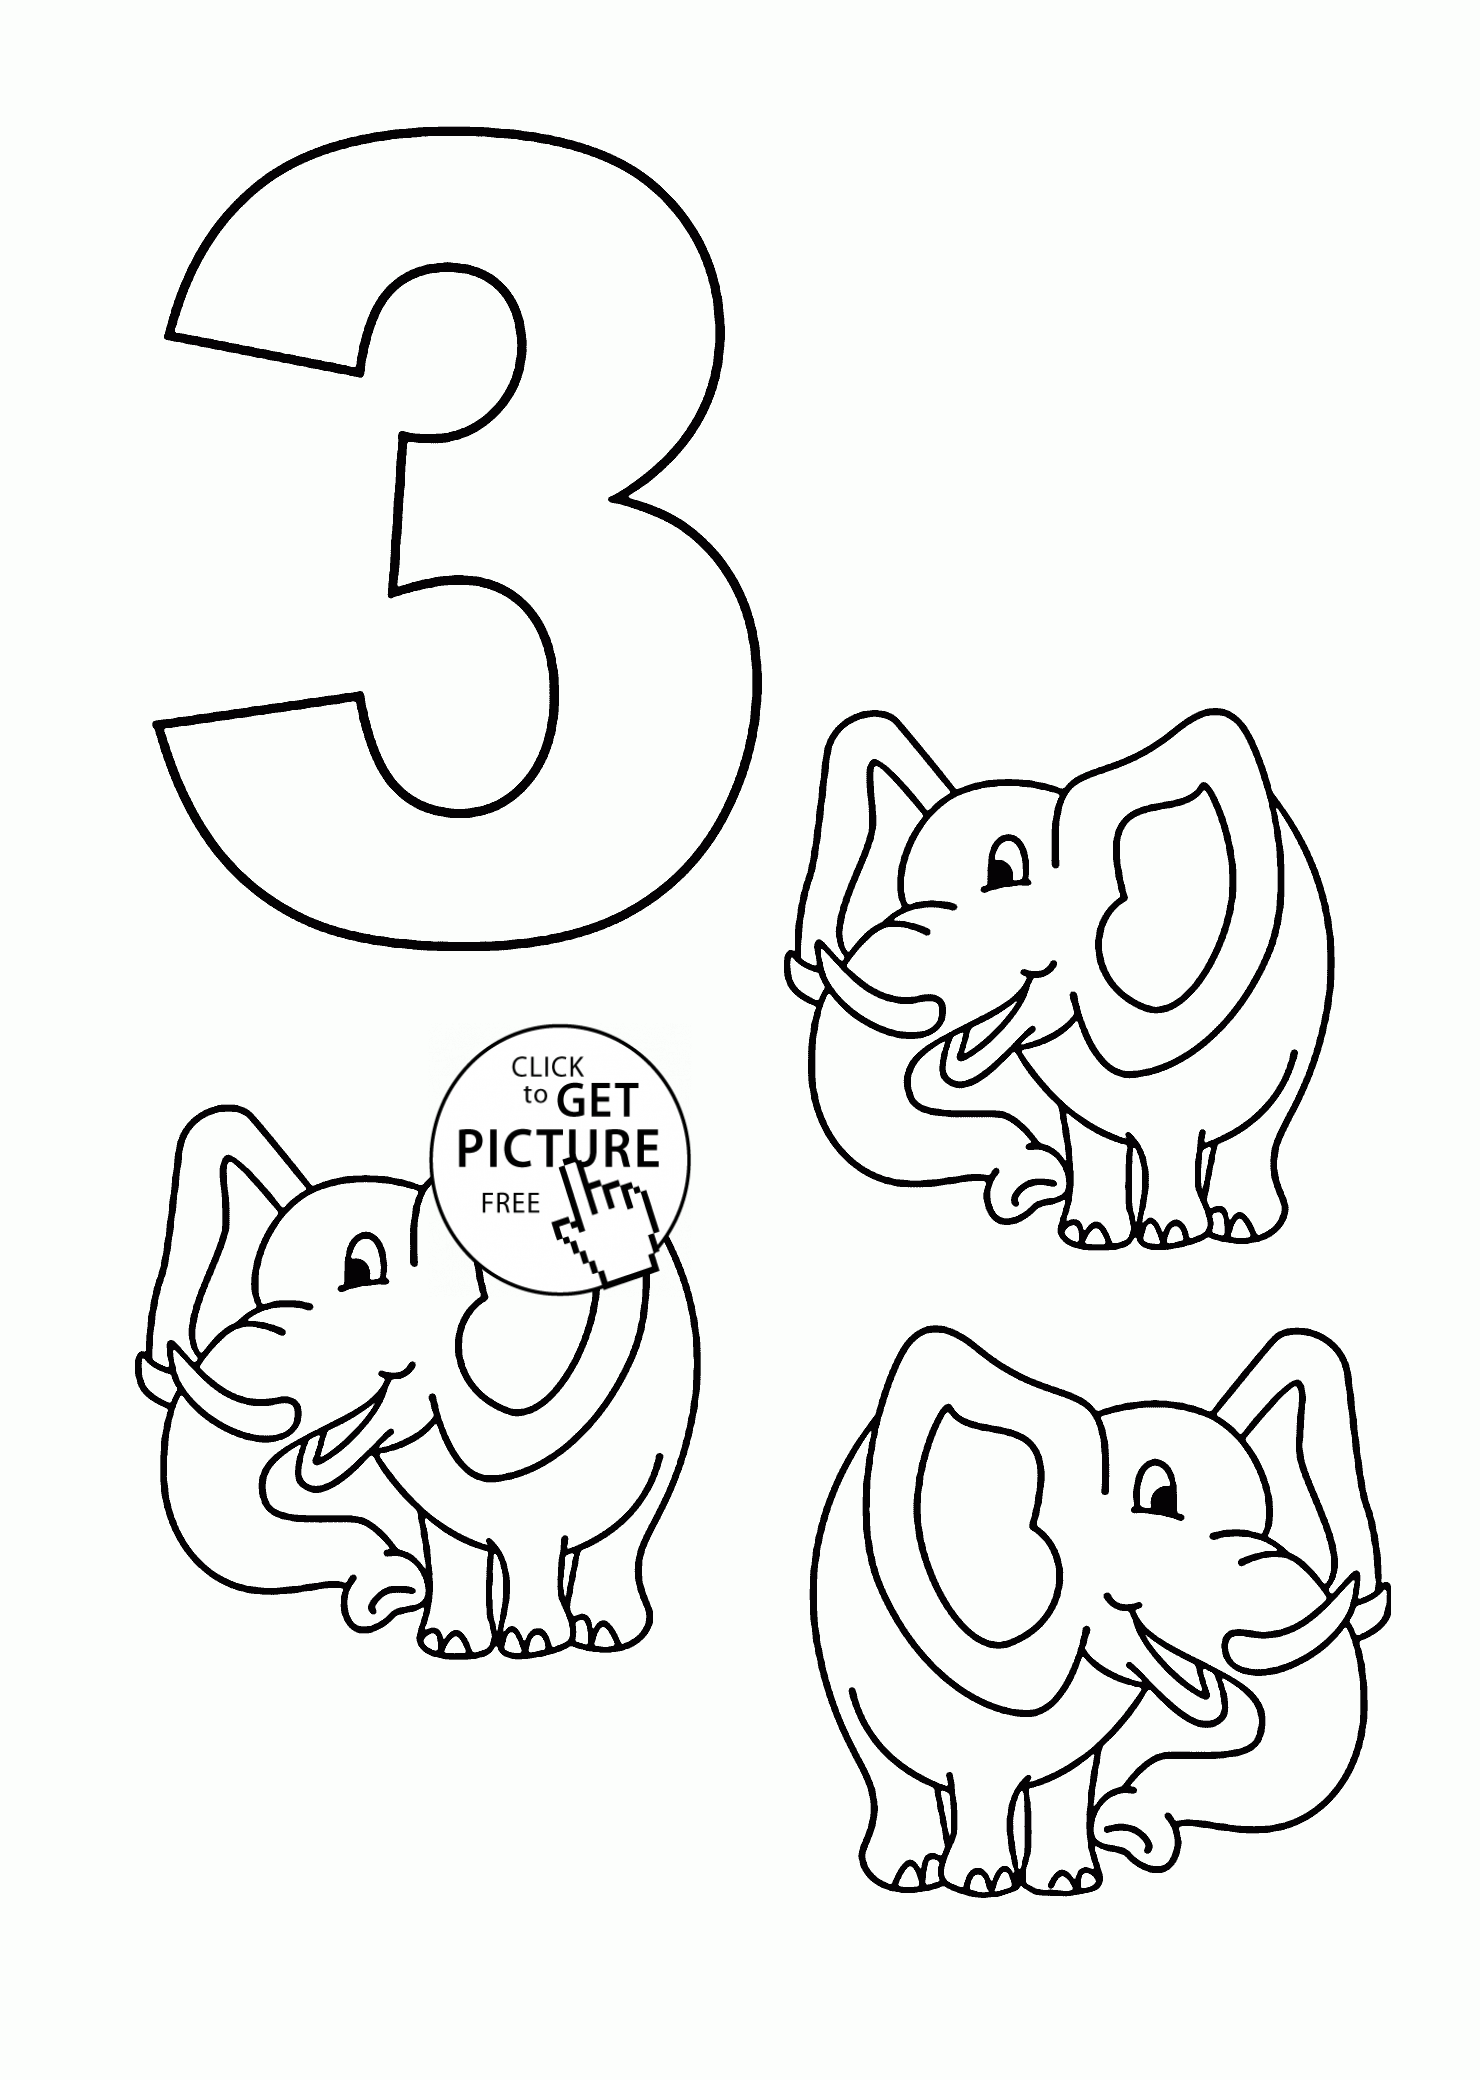 number-1-5-coloring-page-numbers-free-printable-templates-coloring-pages-firstpalette-com